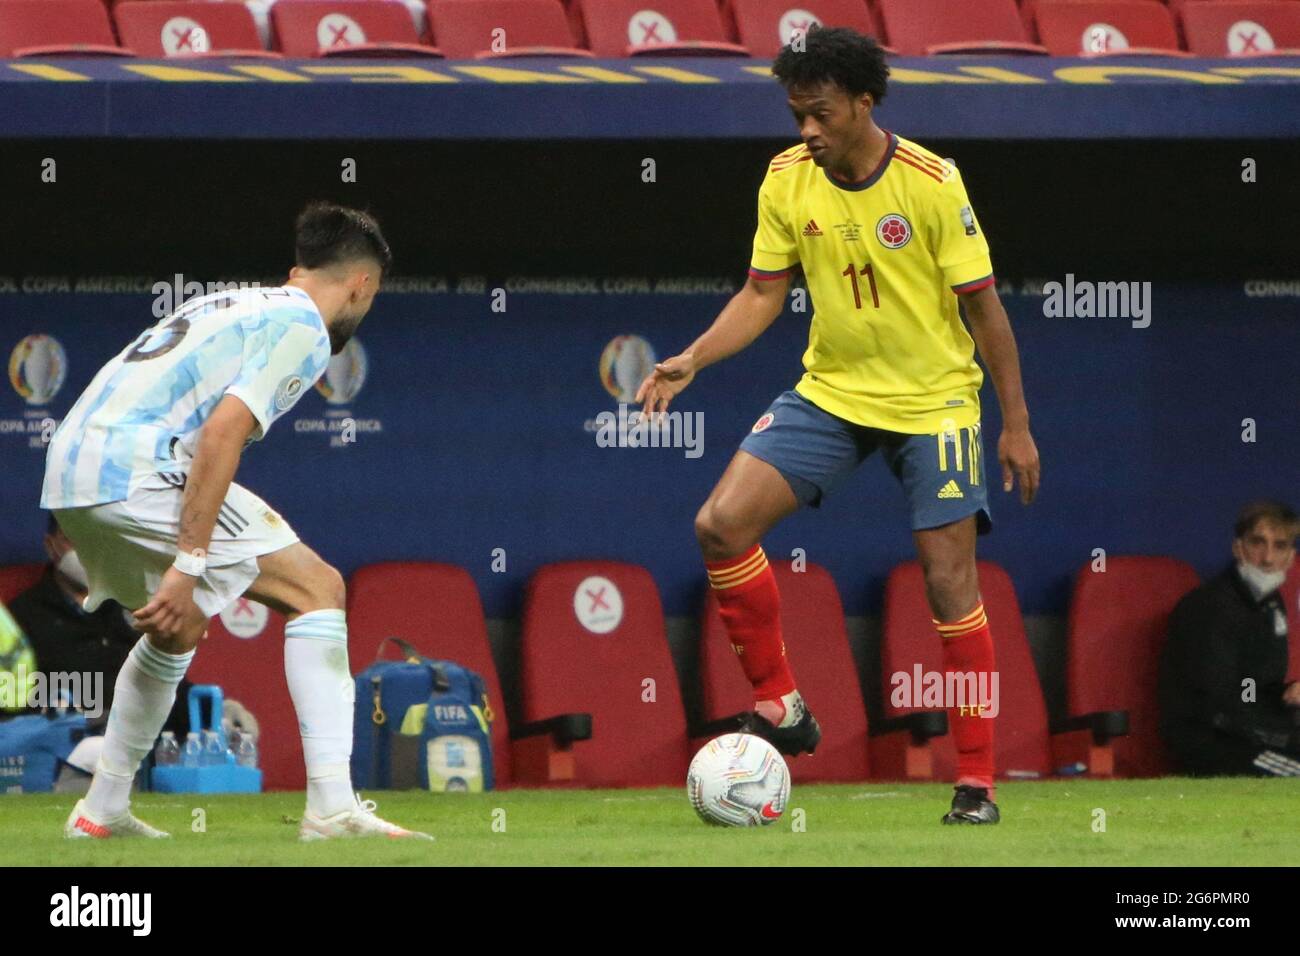 Brasilia, Brazil. 6th July, 2021.J Cuadrado of Colombia during the Copa America 2021, semi-final football match between Argentina and Colombia on July 6, 2021 at Estádio Nacional Mané Garrincha in Brasilia, Brazil. Photo by Laurent Lairys/ABACAPRESS.COM Stock Photo